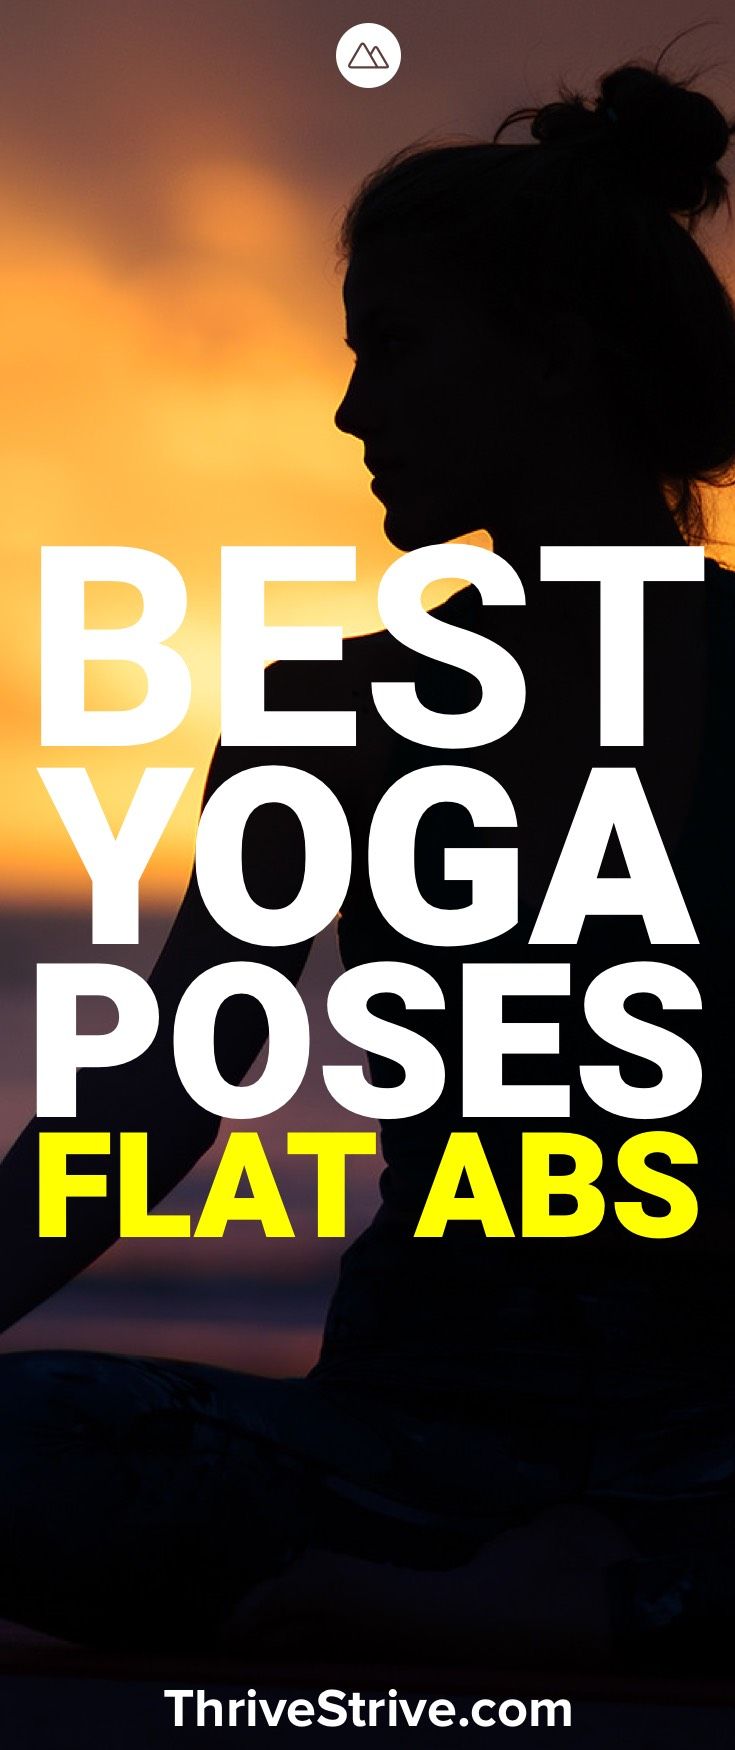 Yoga is great for building strong abs and getting a flatter stomach. Here is how...